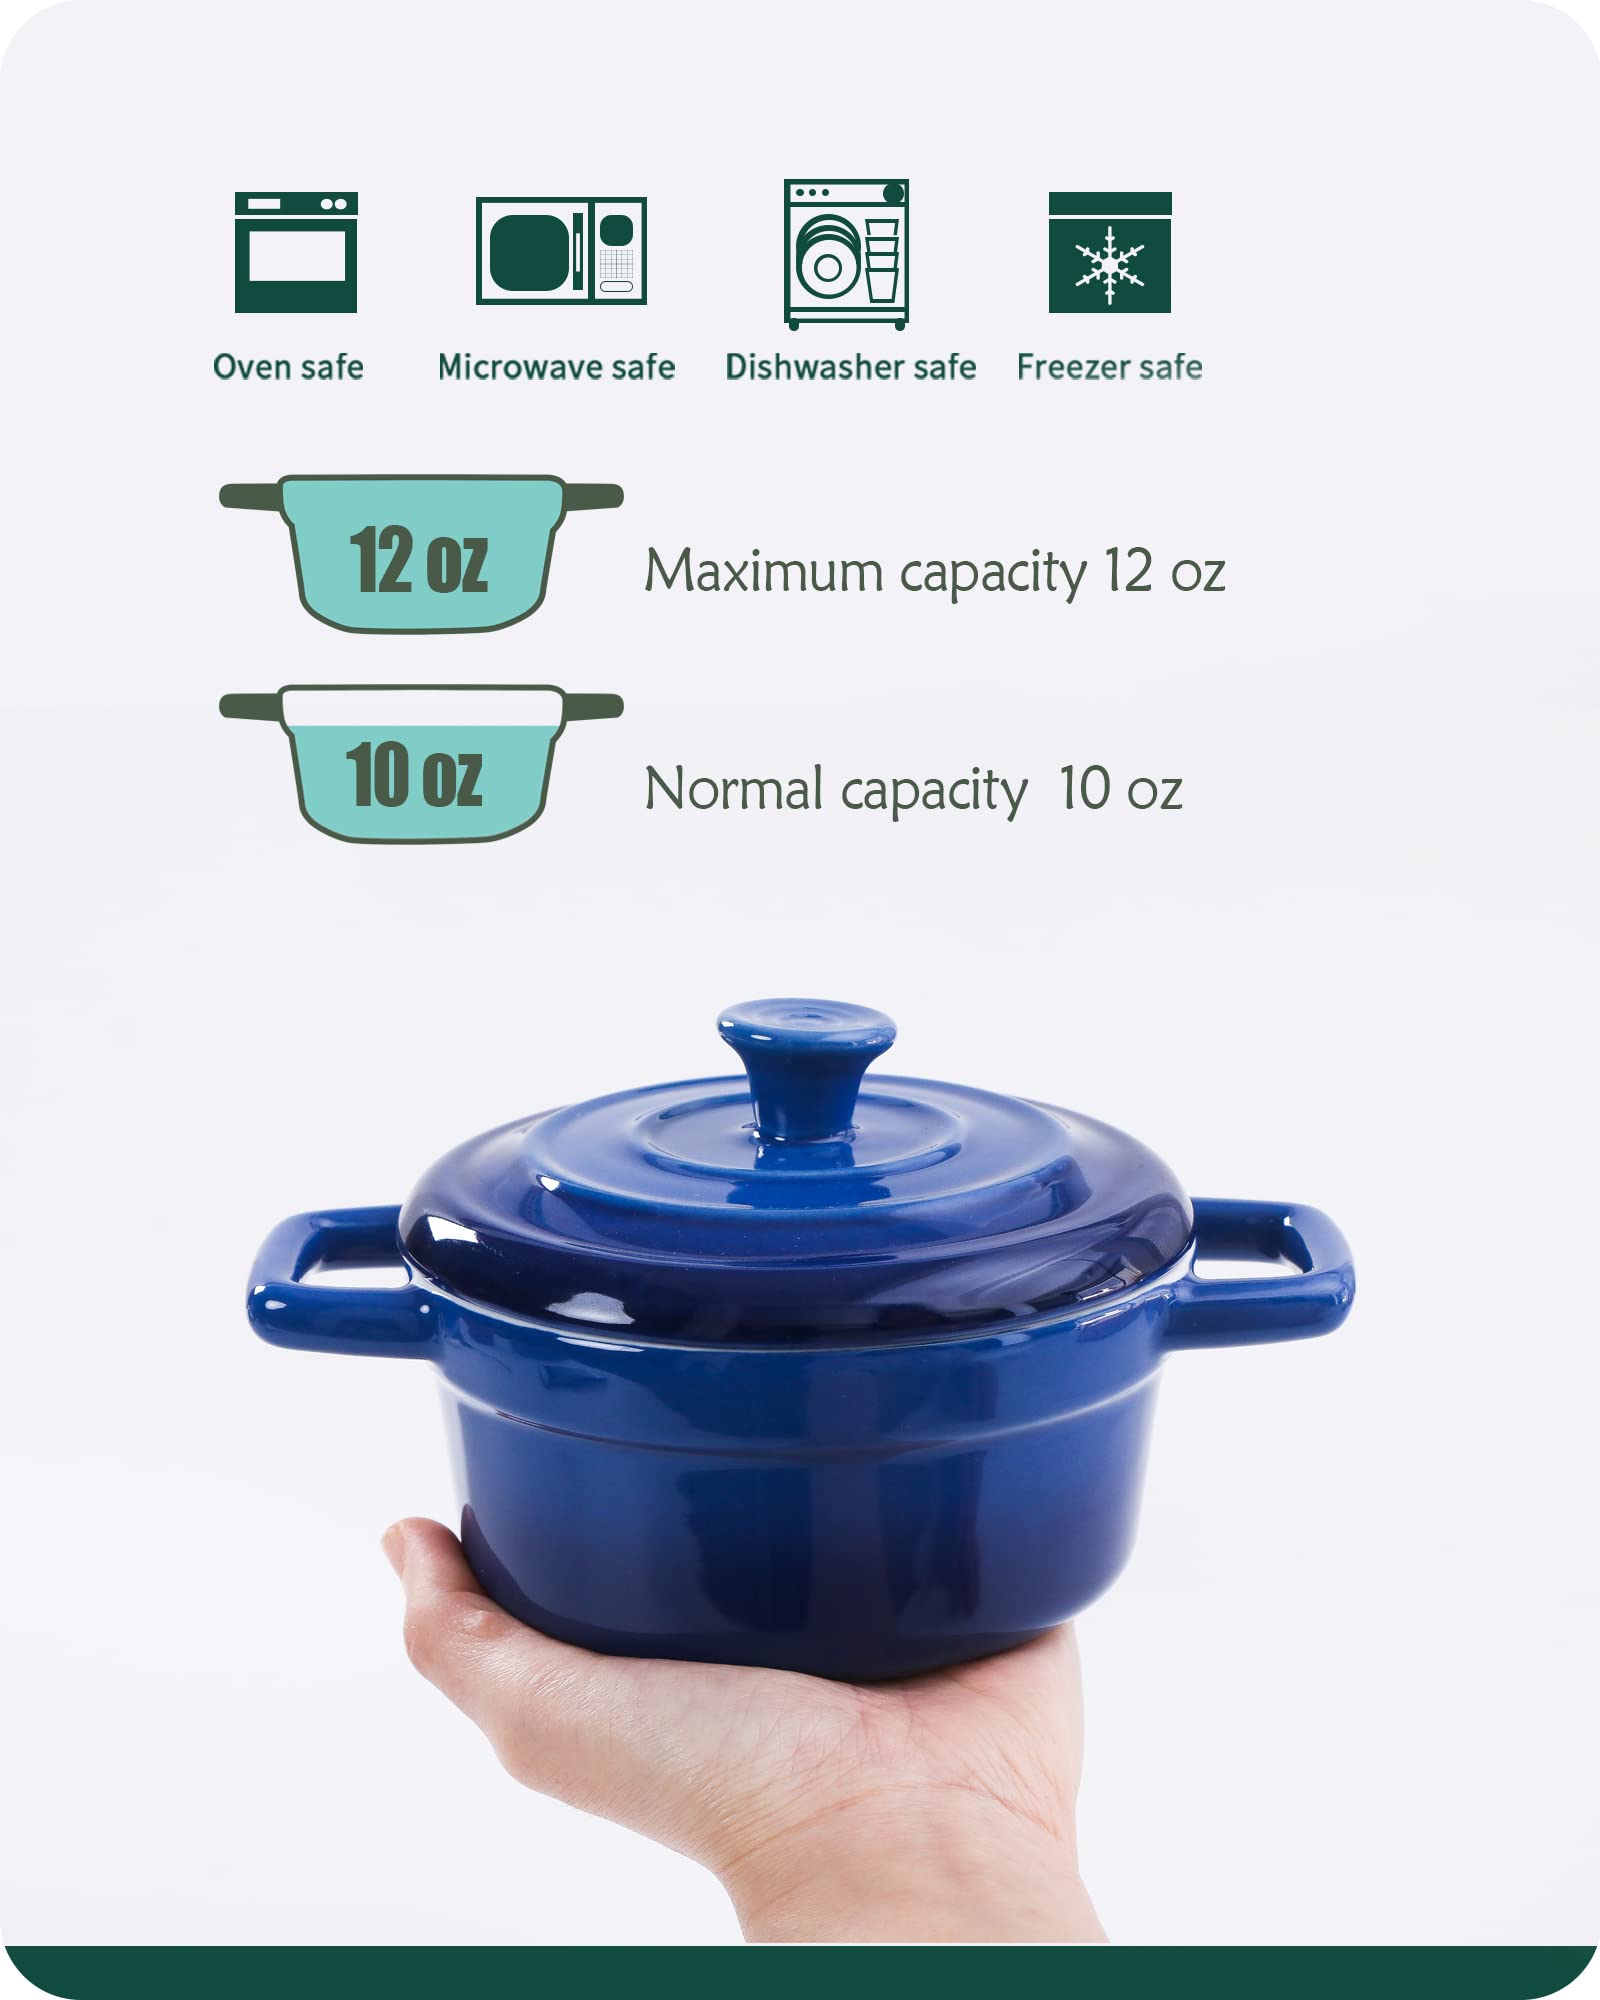 12 oz Mini Cocotte with Lid, Lareina Small Ceramic Round Casseroles Dish with Handles and Cover, Cute Stoneware Individual Severing Pot, Set of 4, Blue